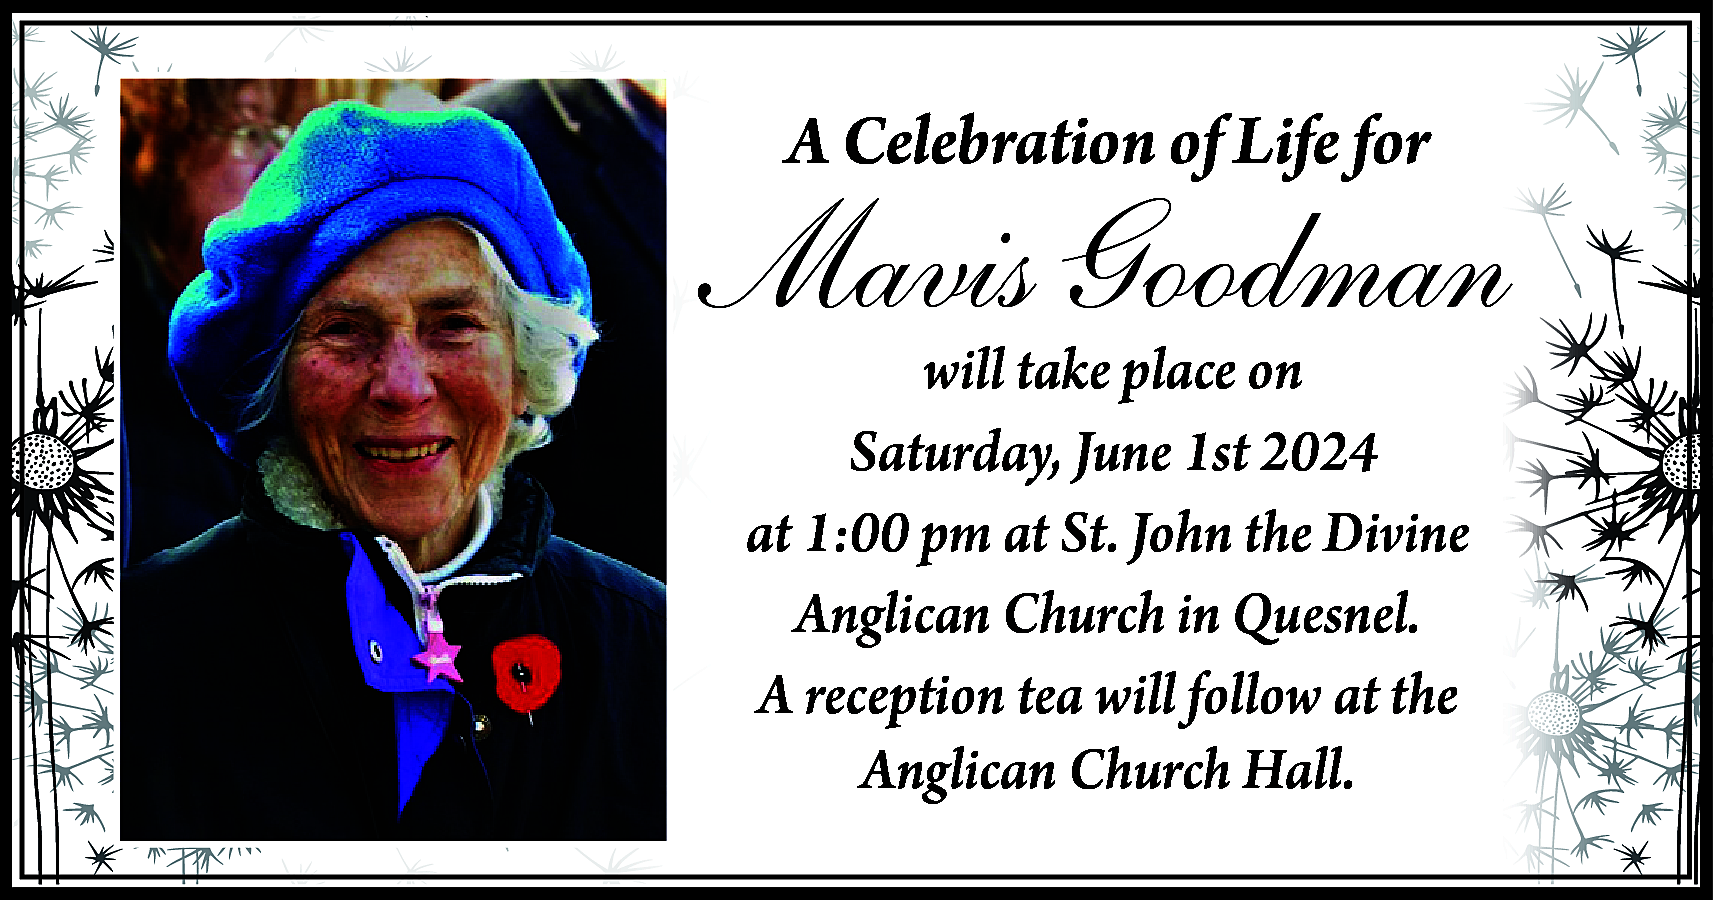 A Celebration of Life for  A Celebration of Life for    Mavis Goodman  will take place on  Saturday, June 1st 2024  at 1:00 pm at St. John the Divine  Anglican Church in Quesnel.  A reception tea will follow at the  Anglican Church Hall.    